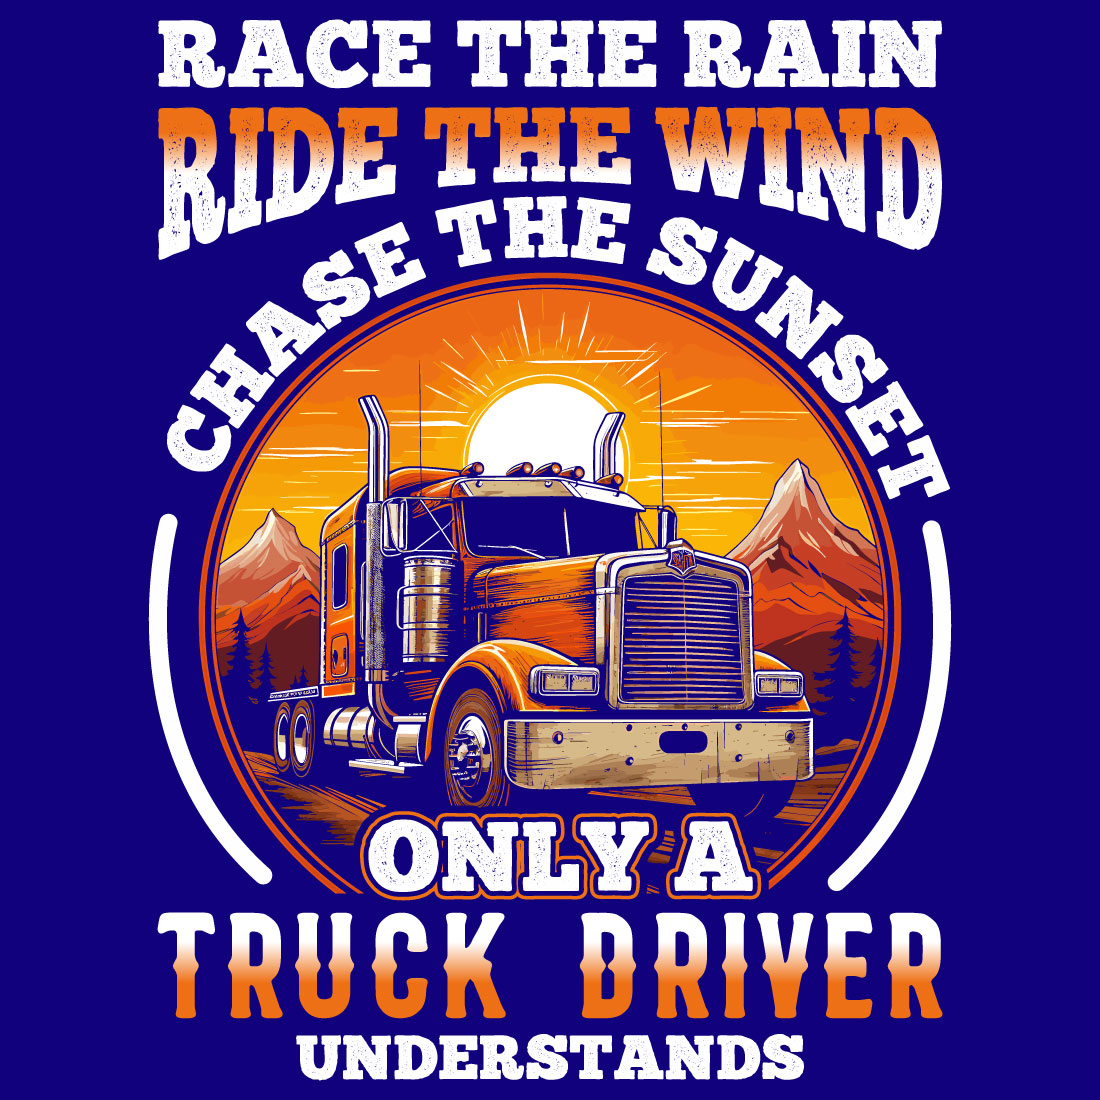 race the rain ride the wind chase the sunset only a truck driver understands, truck driver t shirt design preview image.